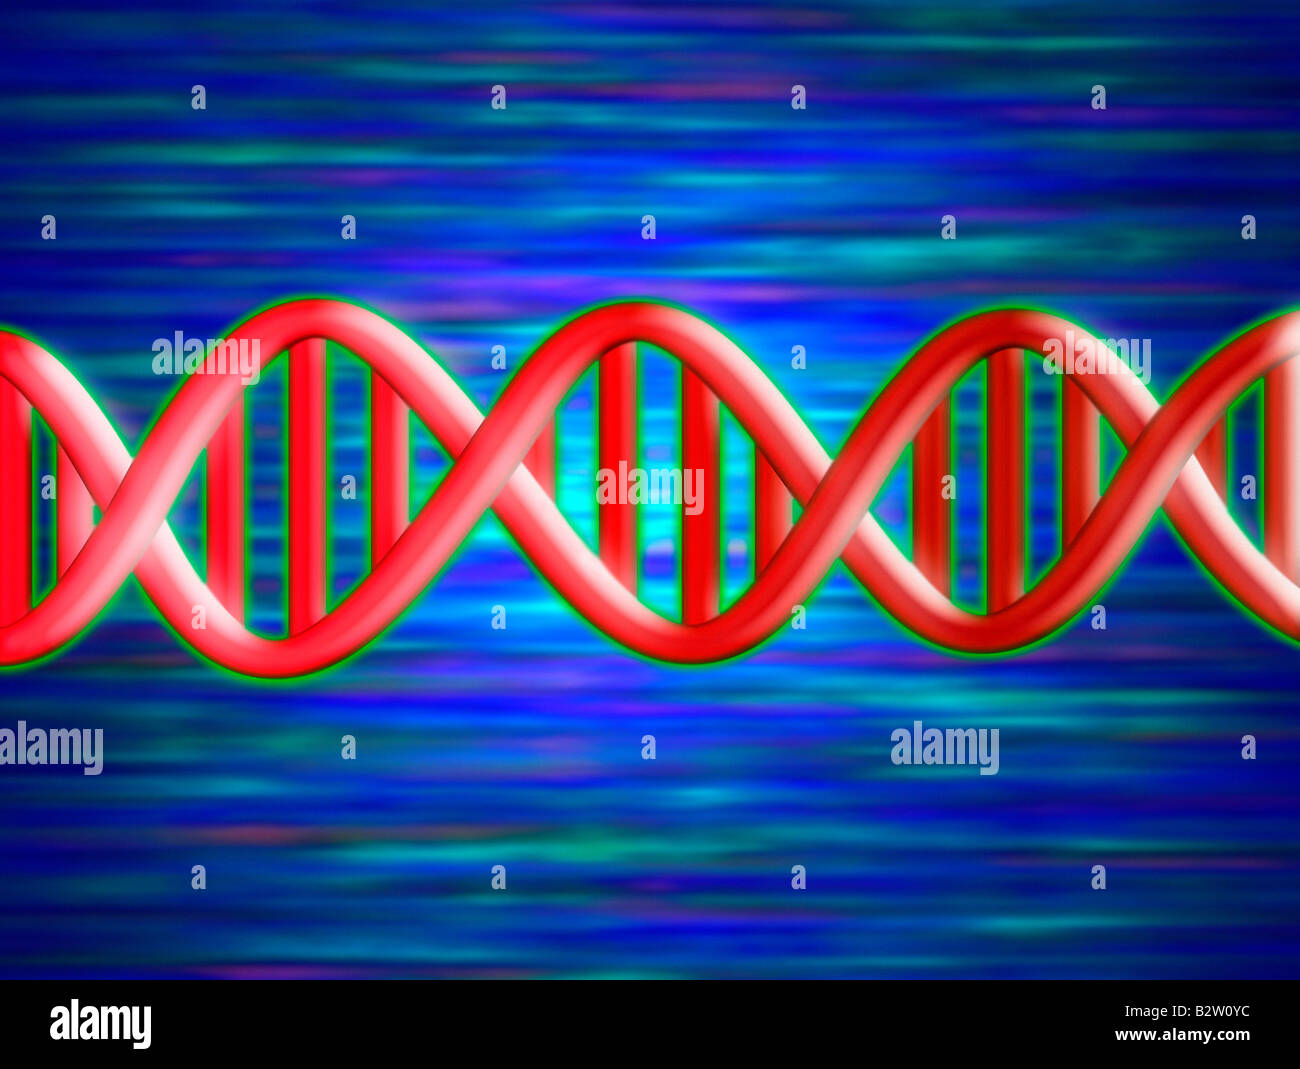 Computer generated illustration of DNA molecule Stock Photo